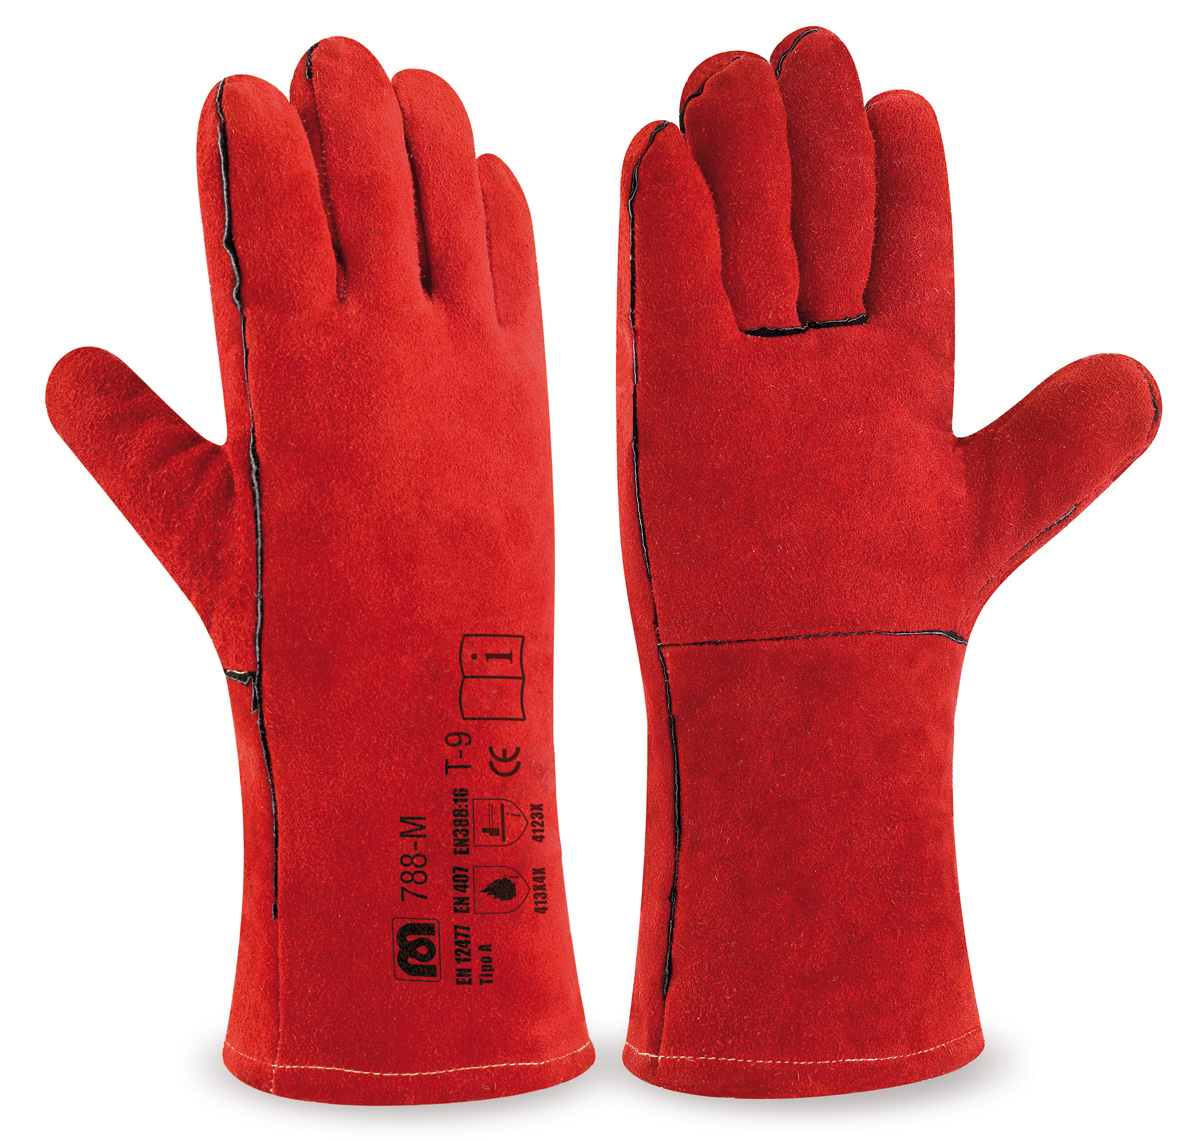 788-M Work Gloves Welding Premium split leather with Kevlar seams and special lining. 30cm.